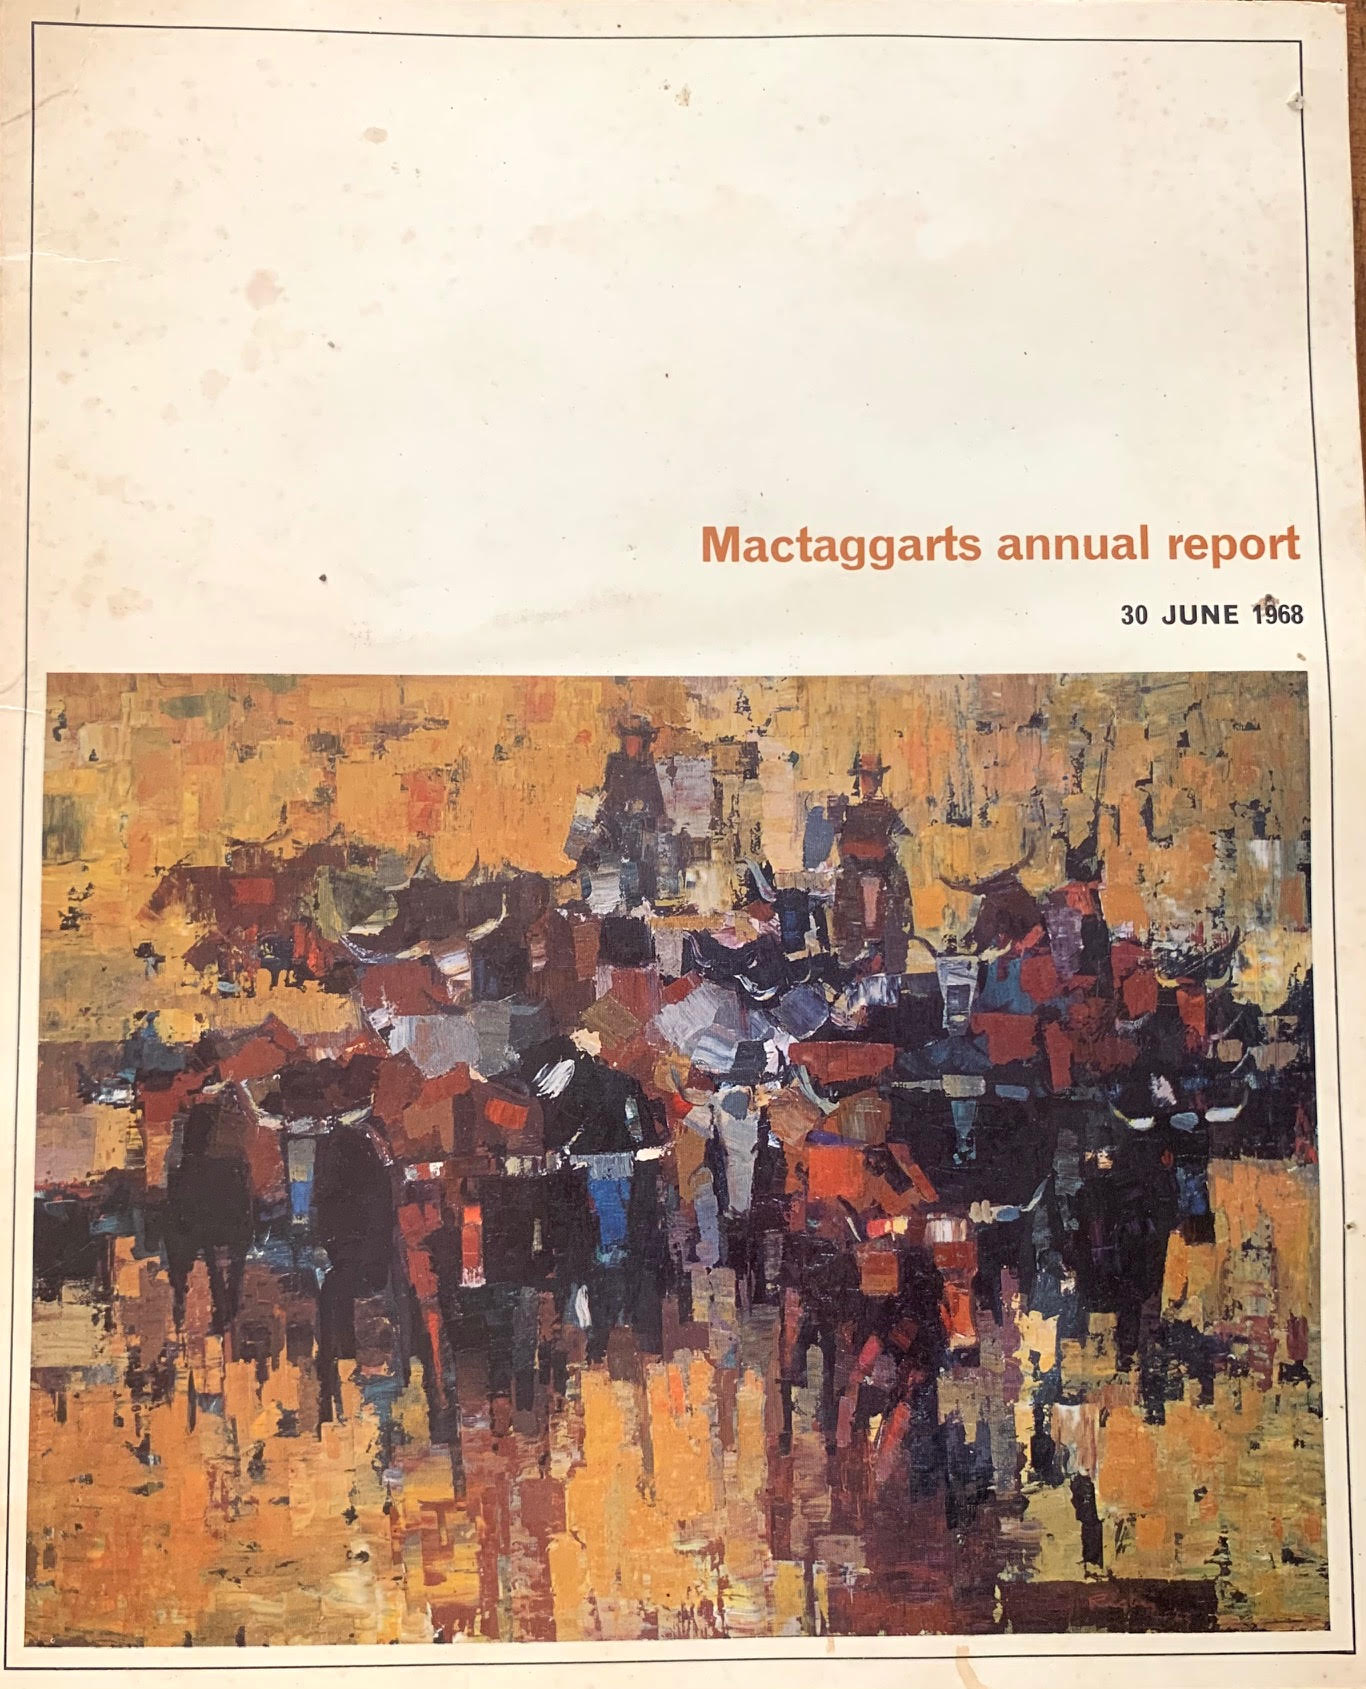 Mactaggarts 1968 Annual Reort Cover 